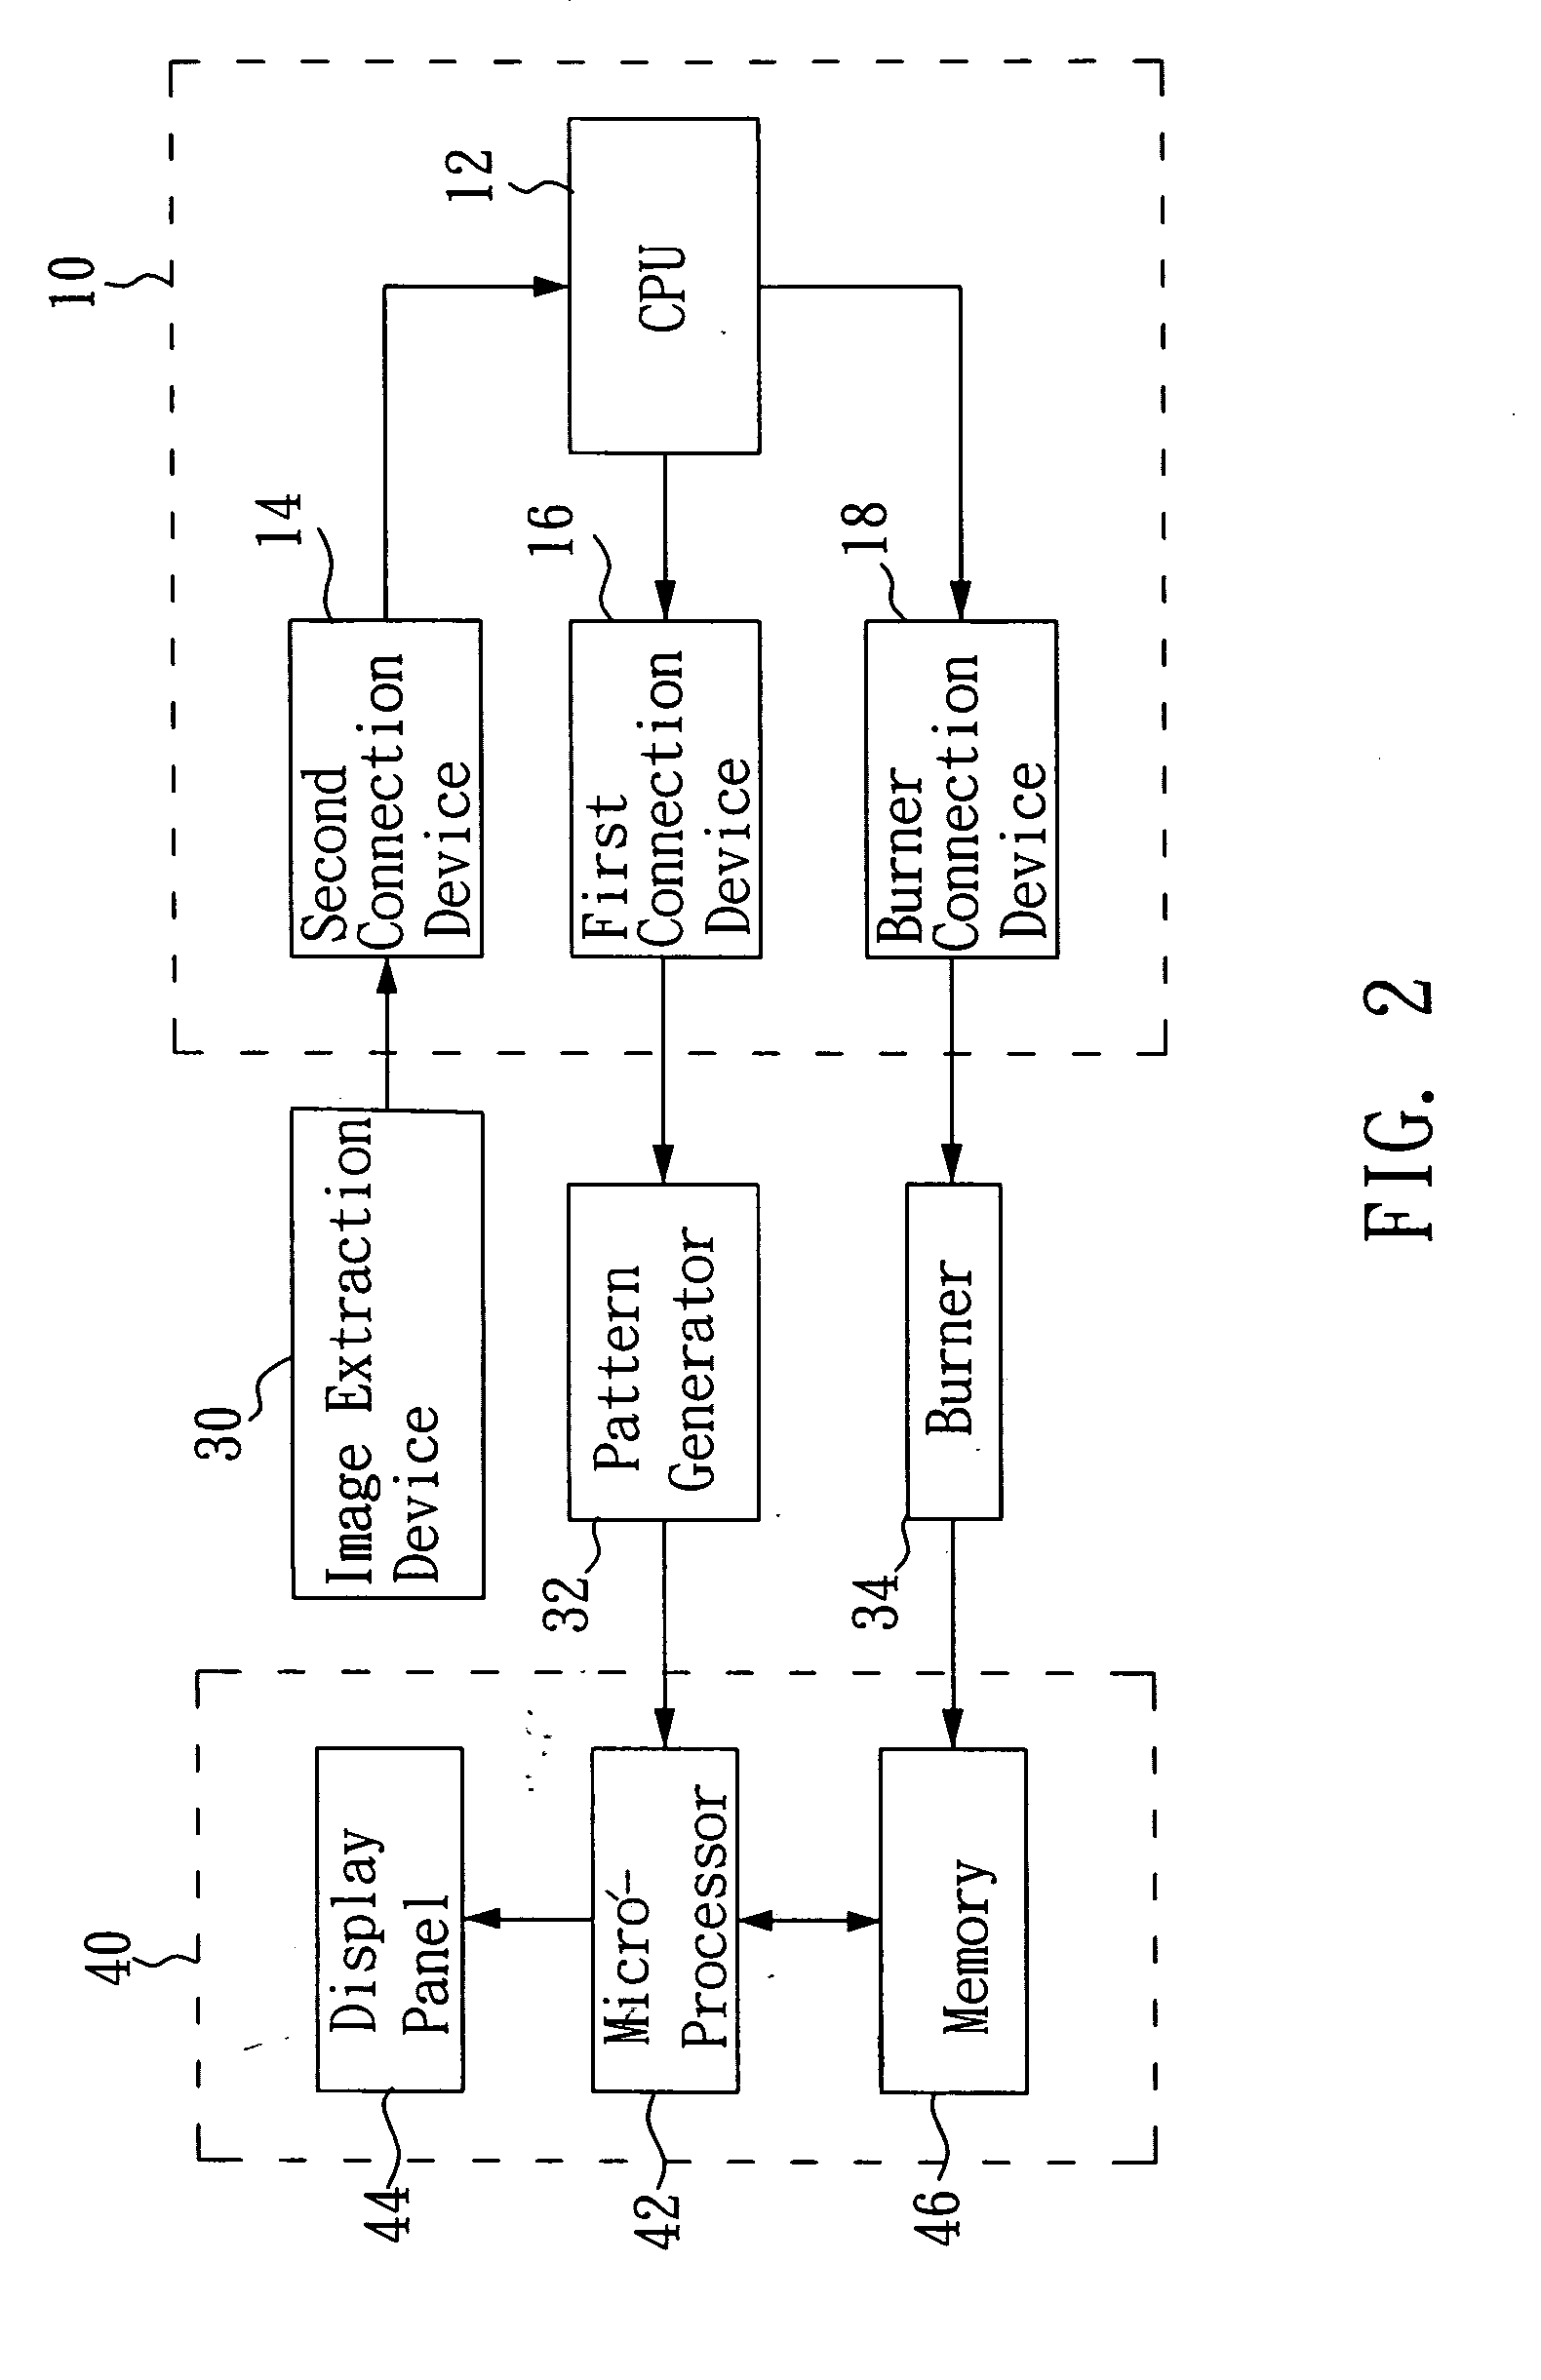 Method and system of color-real adjustment for adjusting a display device